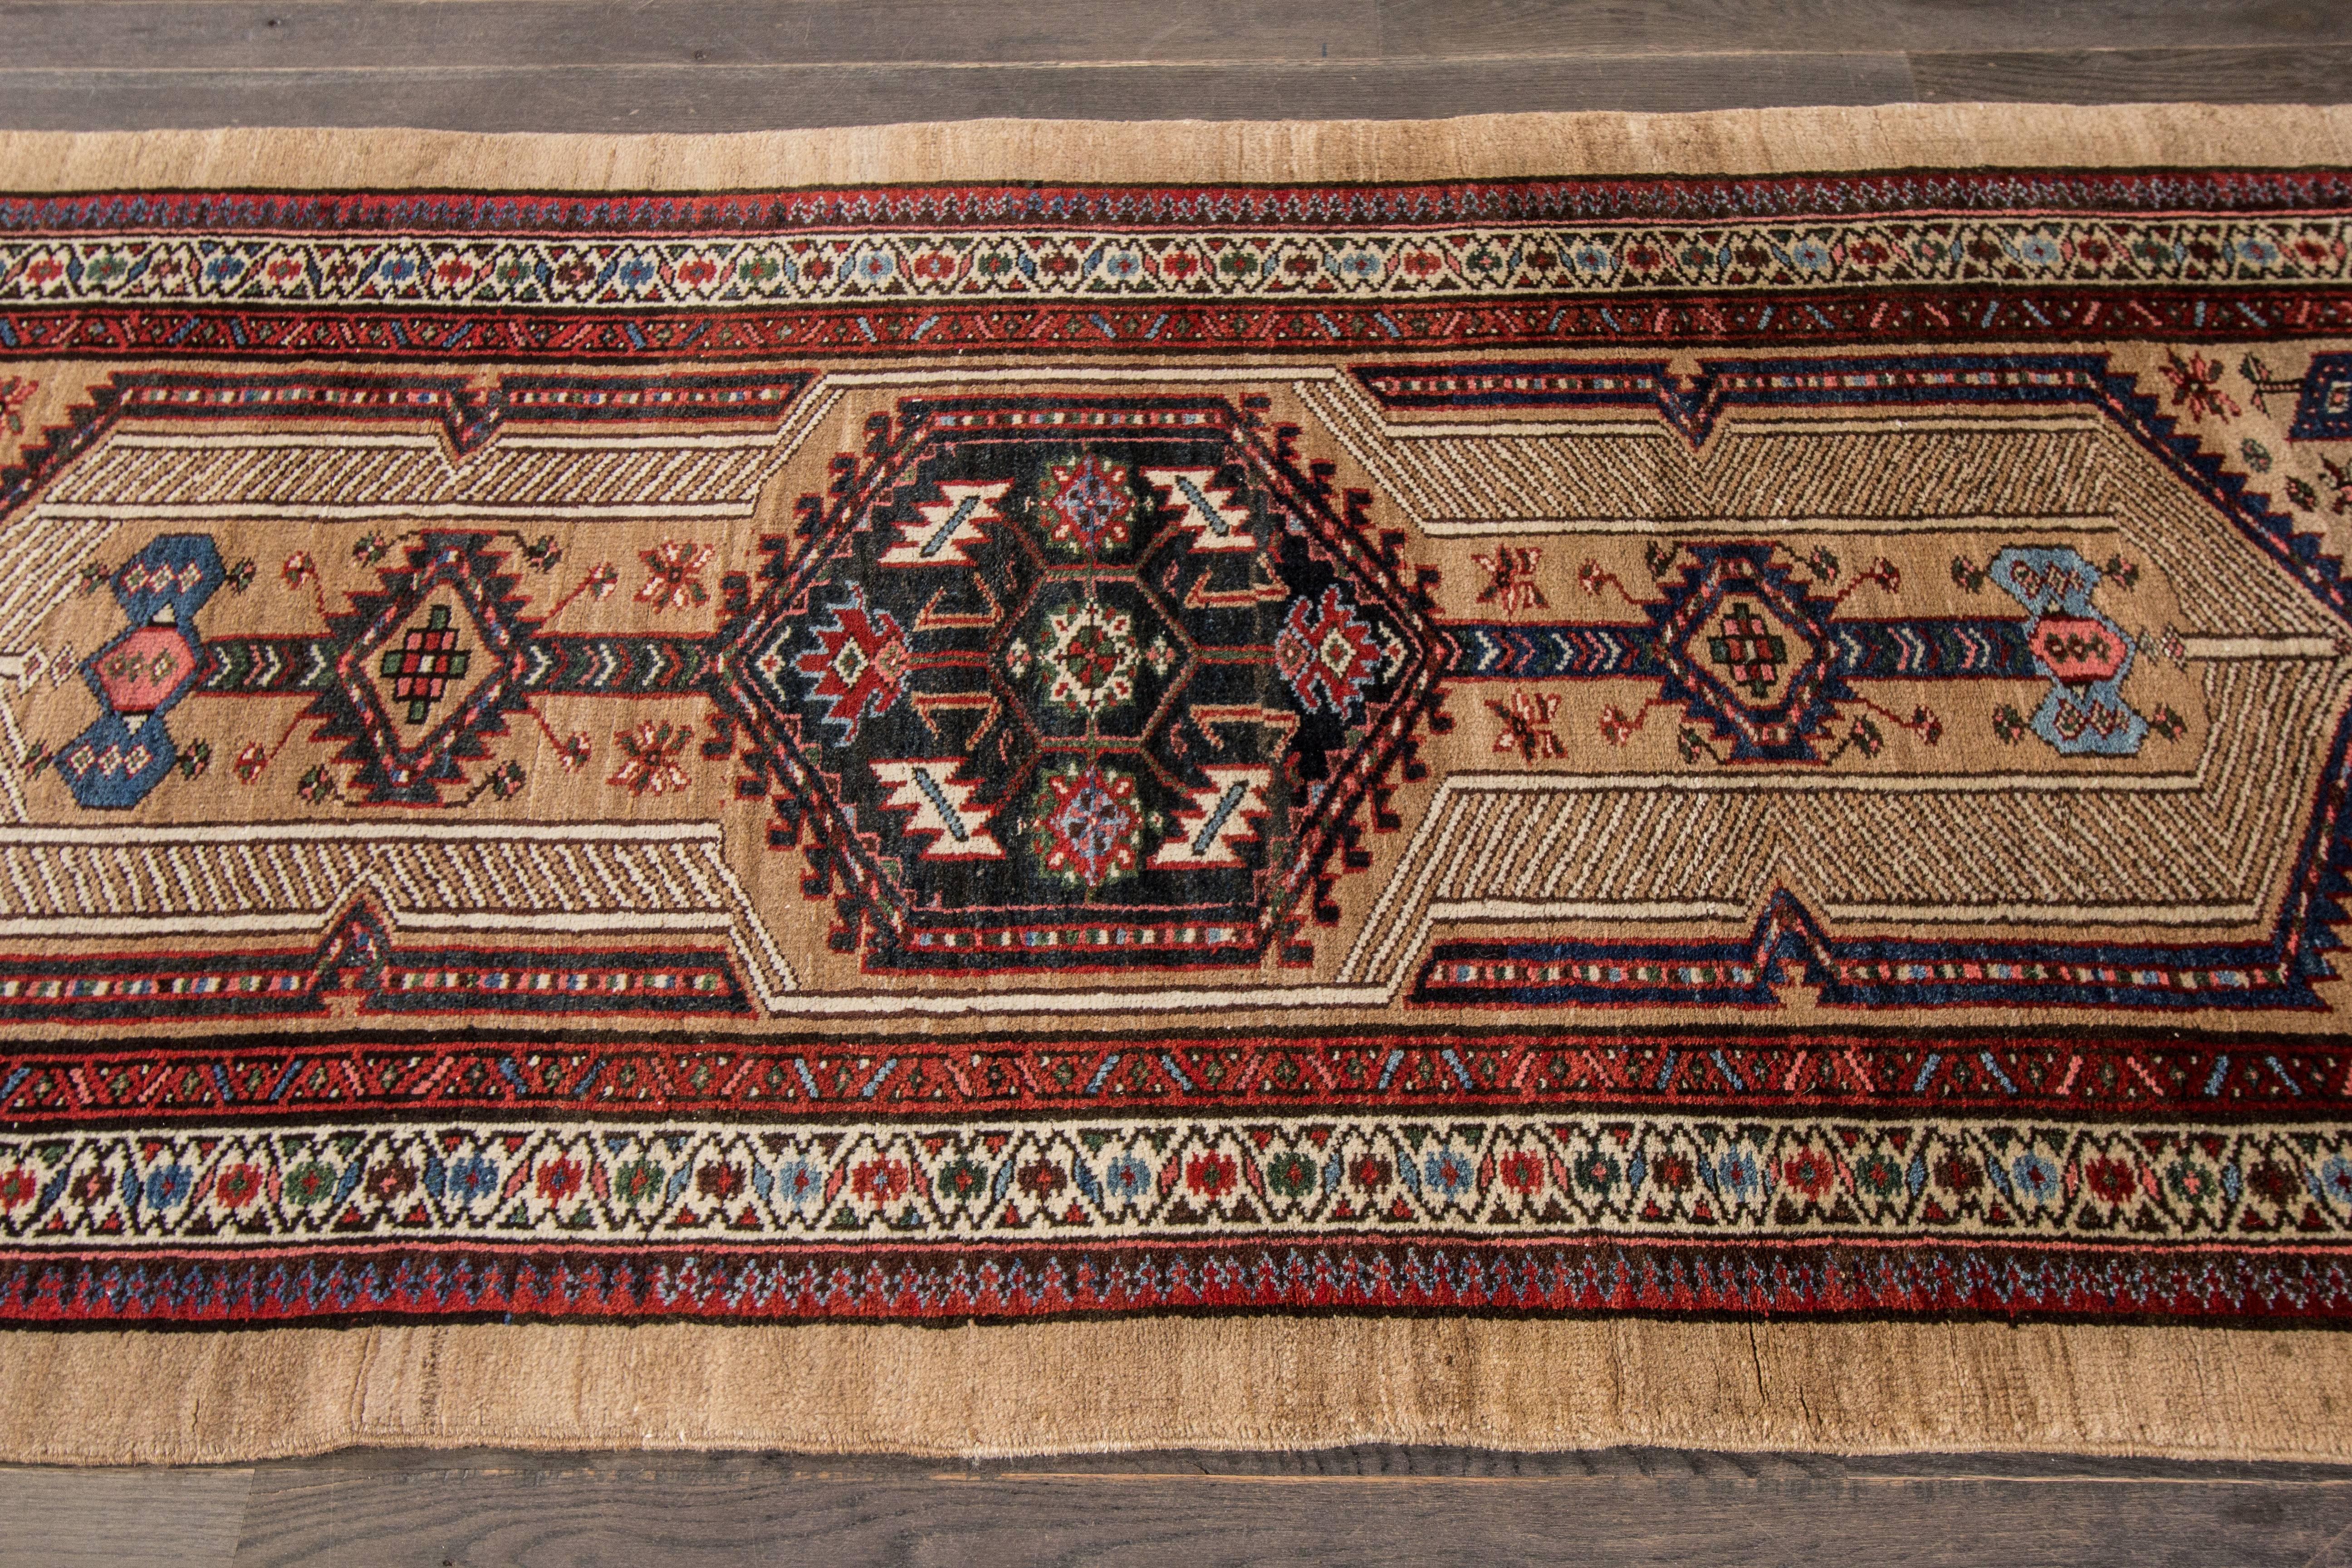 Measures: 3'.3 x 7'.5
A hand-knotted antique Persian Serab rug with a geometric floral design on a beige field. Accents of red, blue and ivory throughout the piece.